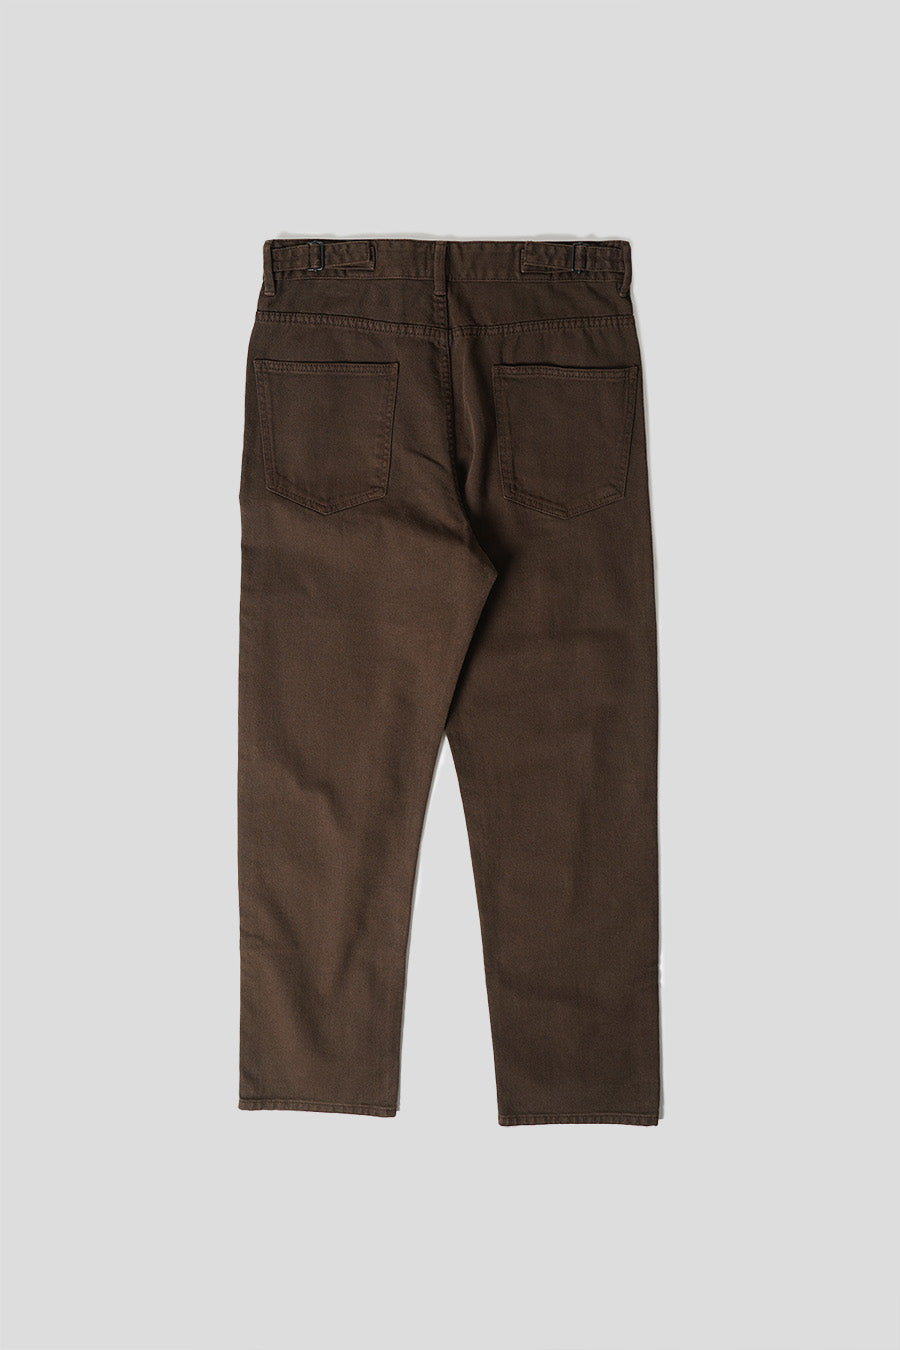 Lemaire CURVED 5 POCKET PANTS, Espresso - Beamhill